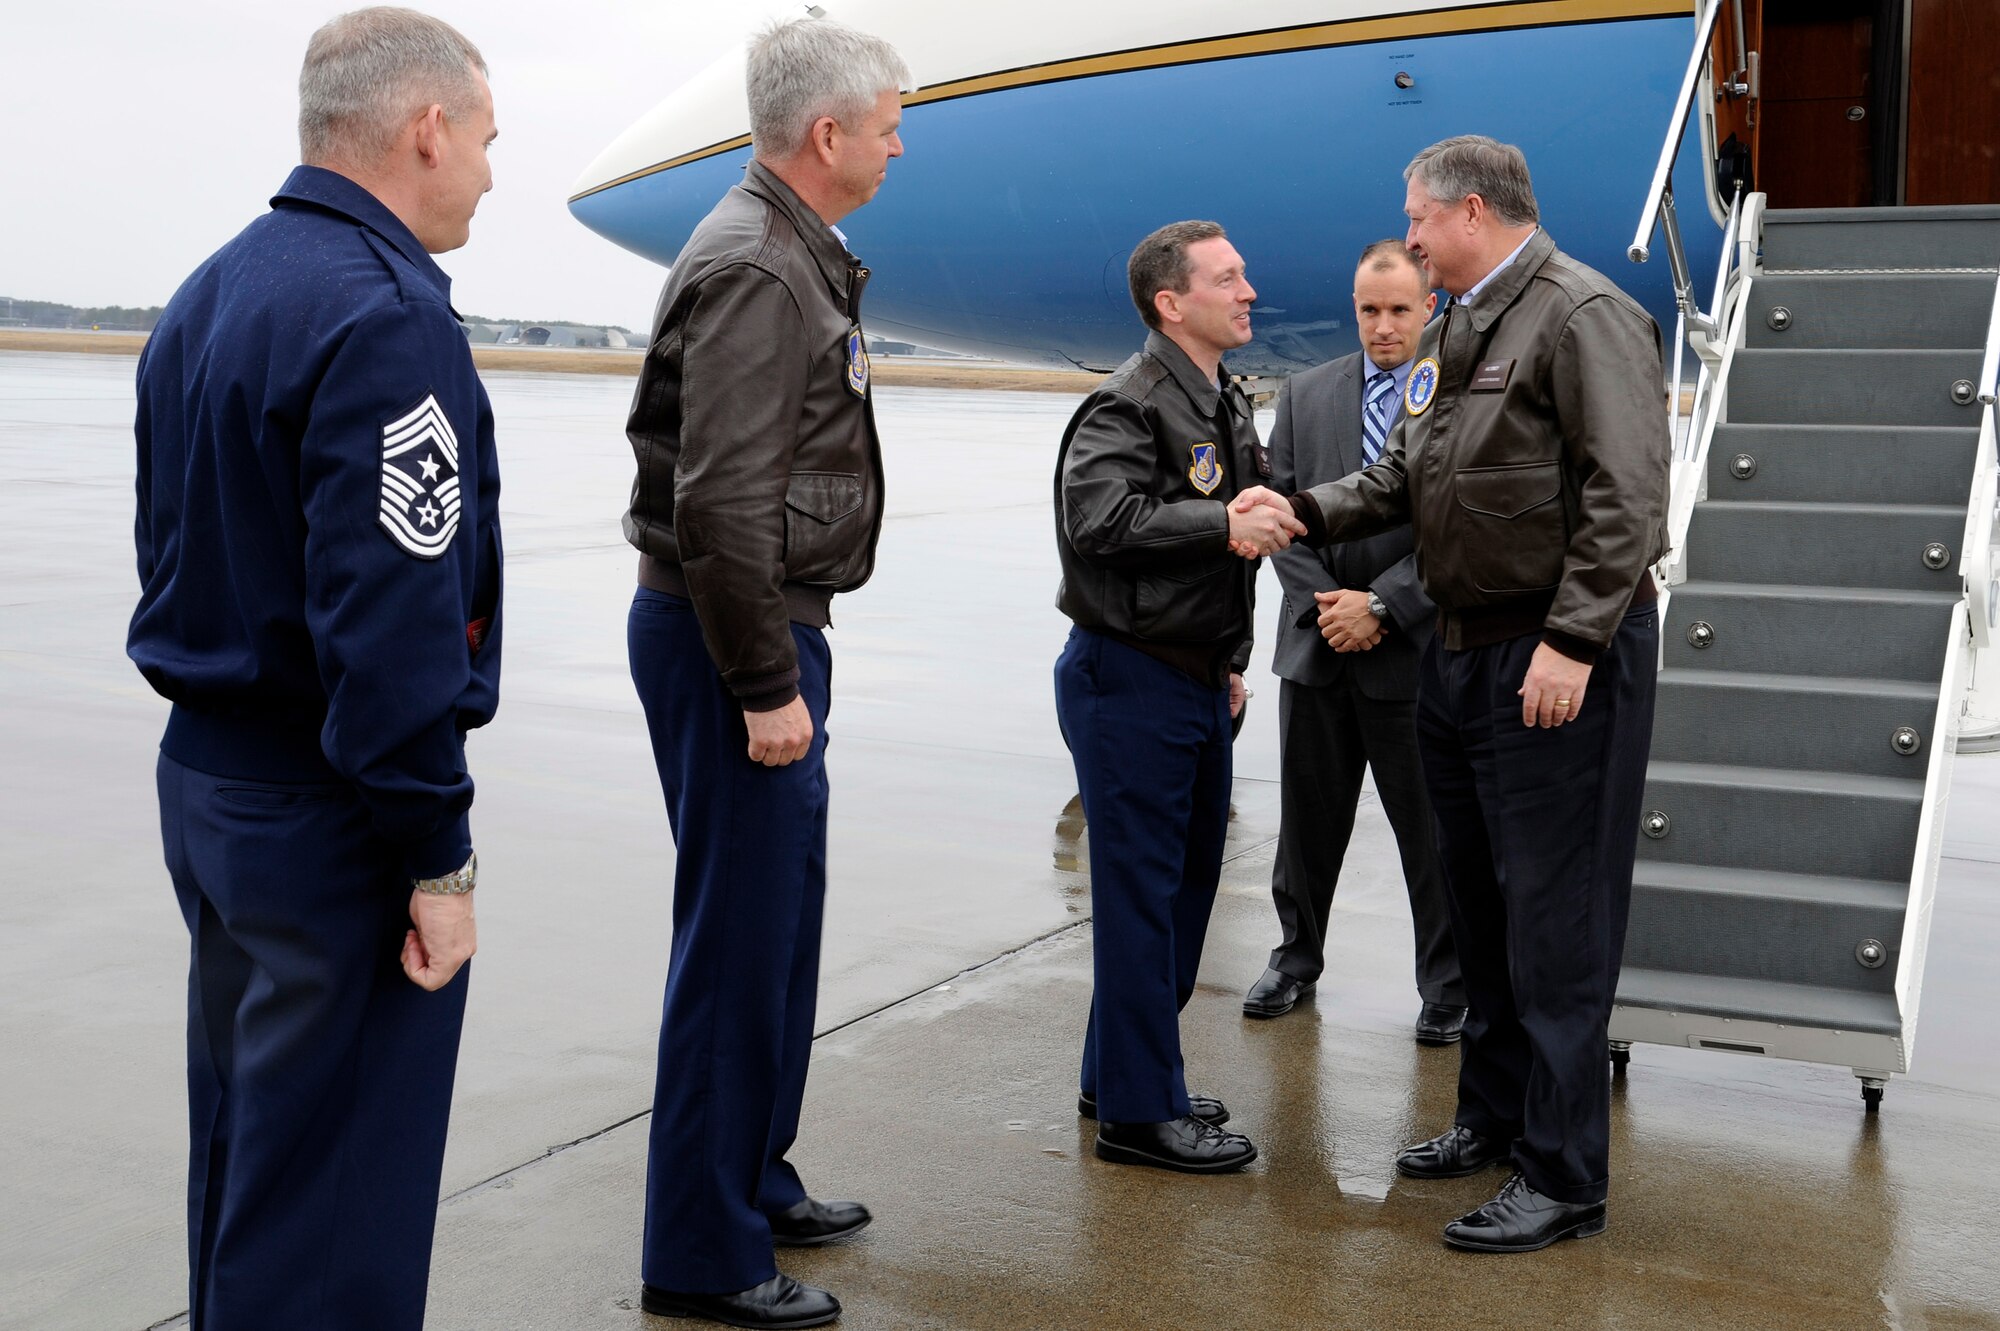 Left to right: U.S. Air Force Chief Master Sgt. Jim Laurent, 35th Fighter Wing command chief, Col. Al Wimmer, 35th FW vice commander and Col. Michael Rothstein, 35th FW commander, greet Secretary of the Air Force Michael Donley upon his arrival to Misawa Air Base, Japan, April 23, 2012. During the visit, Donley met with Airmen and toured various base facilities. (U.S. Air Force photo/Tech. Sgt. Marie Brown/Released)
